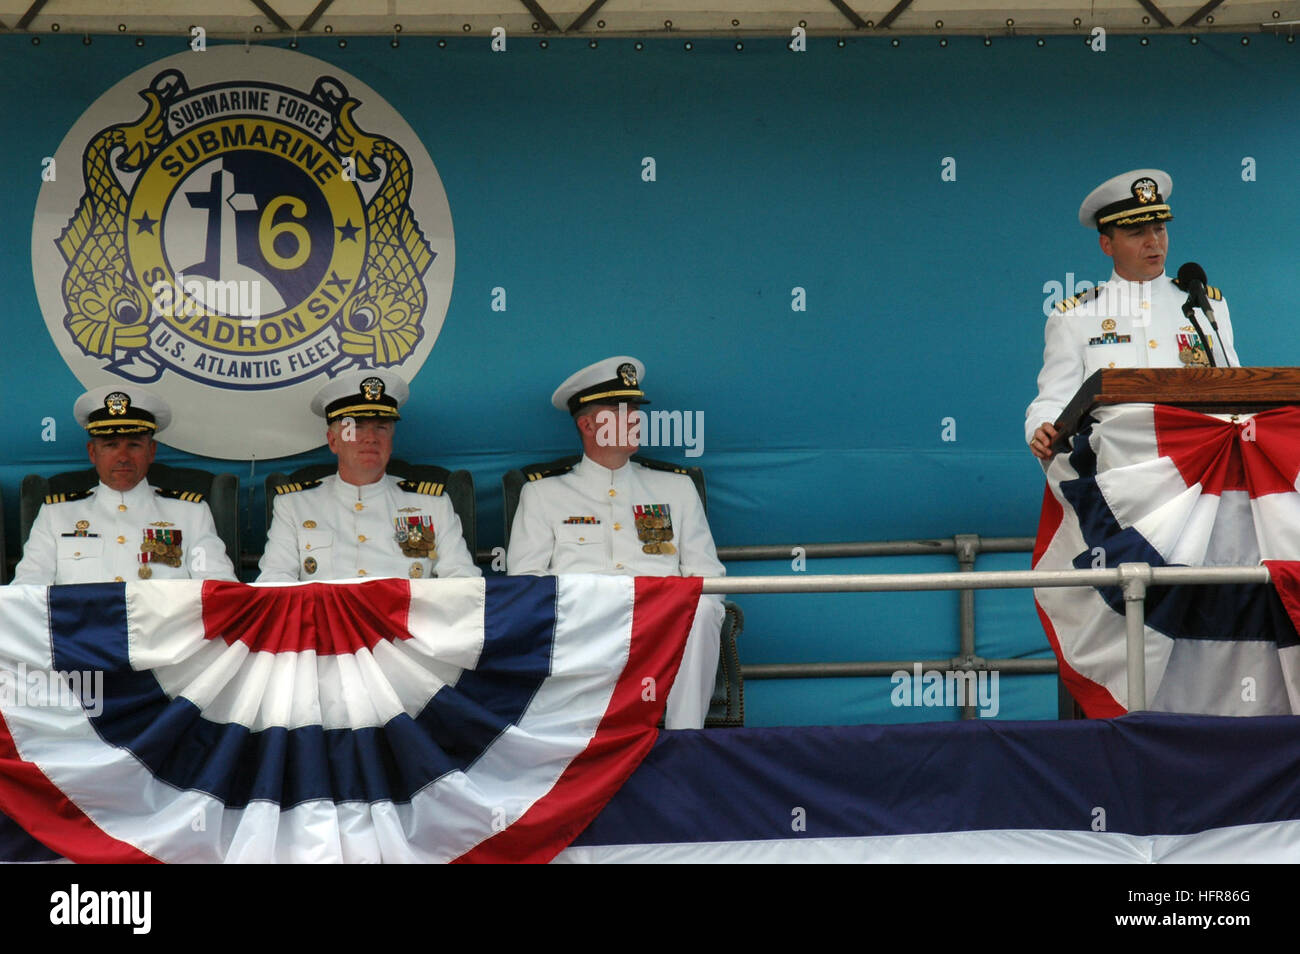 060623-N-1928H-199 Norfolk, Va. (June 23, 2006) - Cmdr. Christopher L. Harkins speaks after assuming command of the Los Angeles-class fast attack USS Montpelier (SSN 765) during a change of command ceremony at Naval Station Norfolk. U.S. Navy photo by Lithographer Seaman Santos M. Huante (RELEASED) US Navy 060623-N-1928H-199 Cmdr. Christopher L. Harkins speaks after assuming command of the Los Angeles-class fast attack USS Montpelier (SSN 765) during a change of command ceremony at Naval Station Norfolk Stock Photo